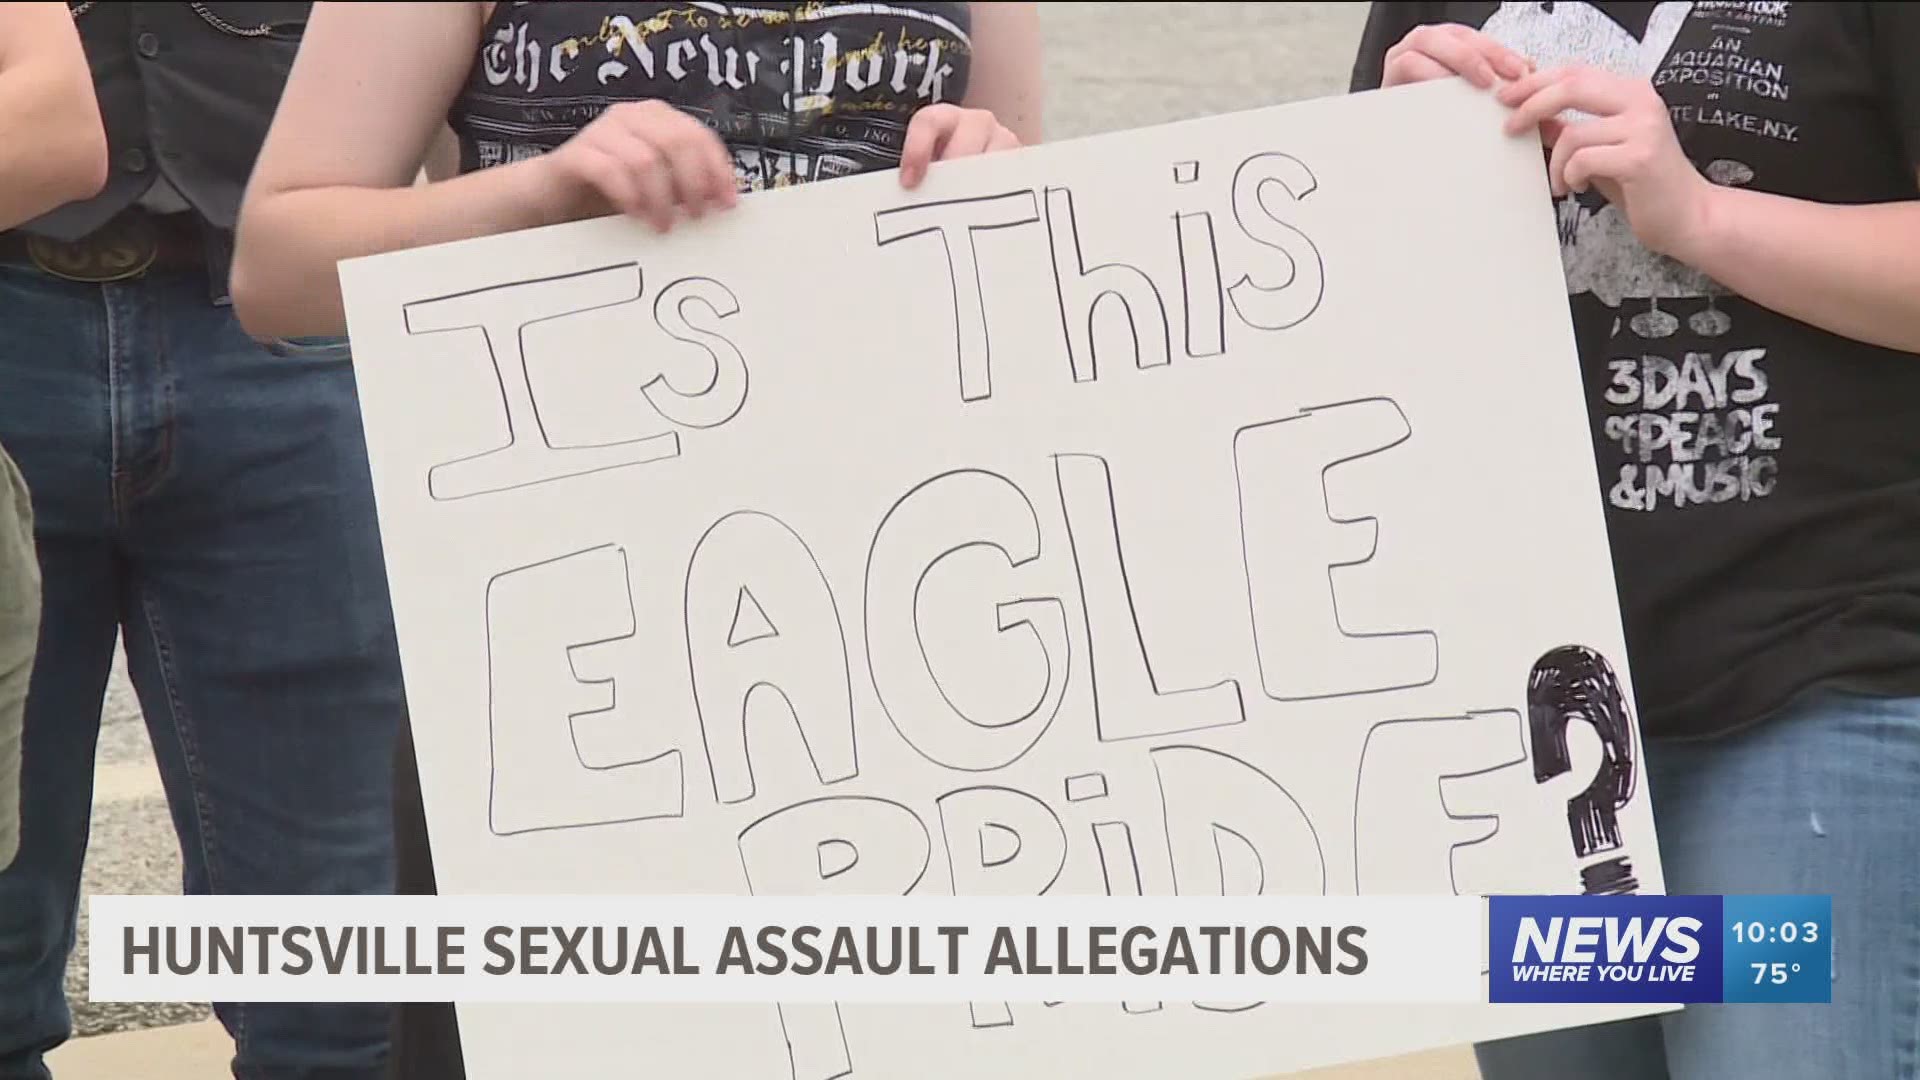 Parents say students on the basketball team were engaging in sexual hazing activities in the locker room.